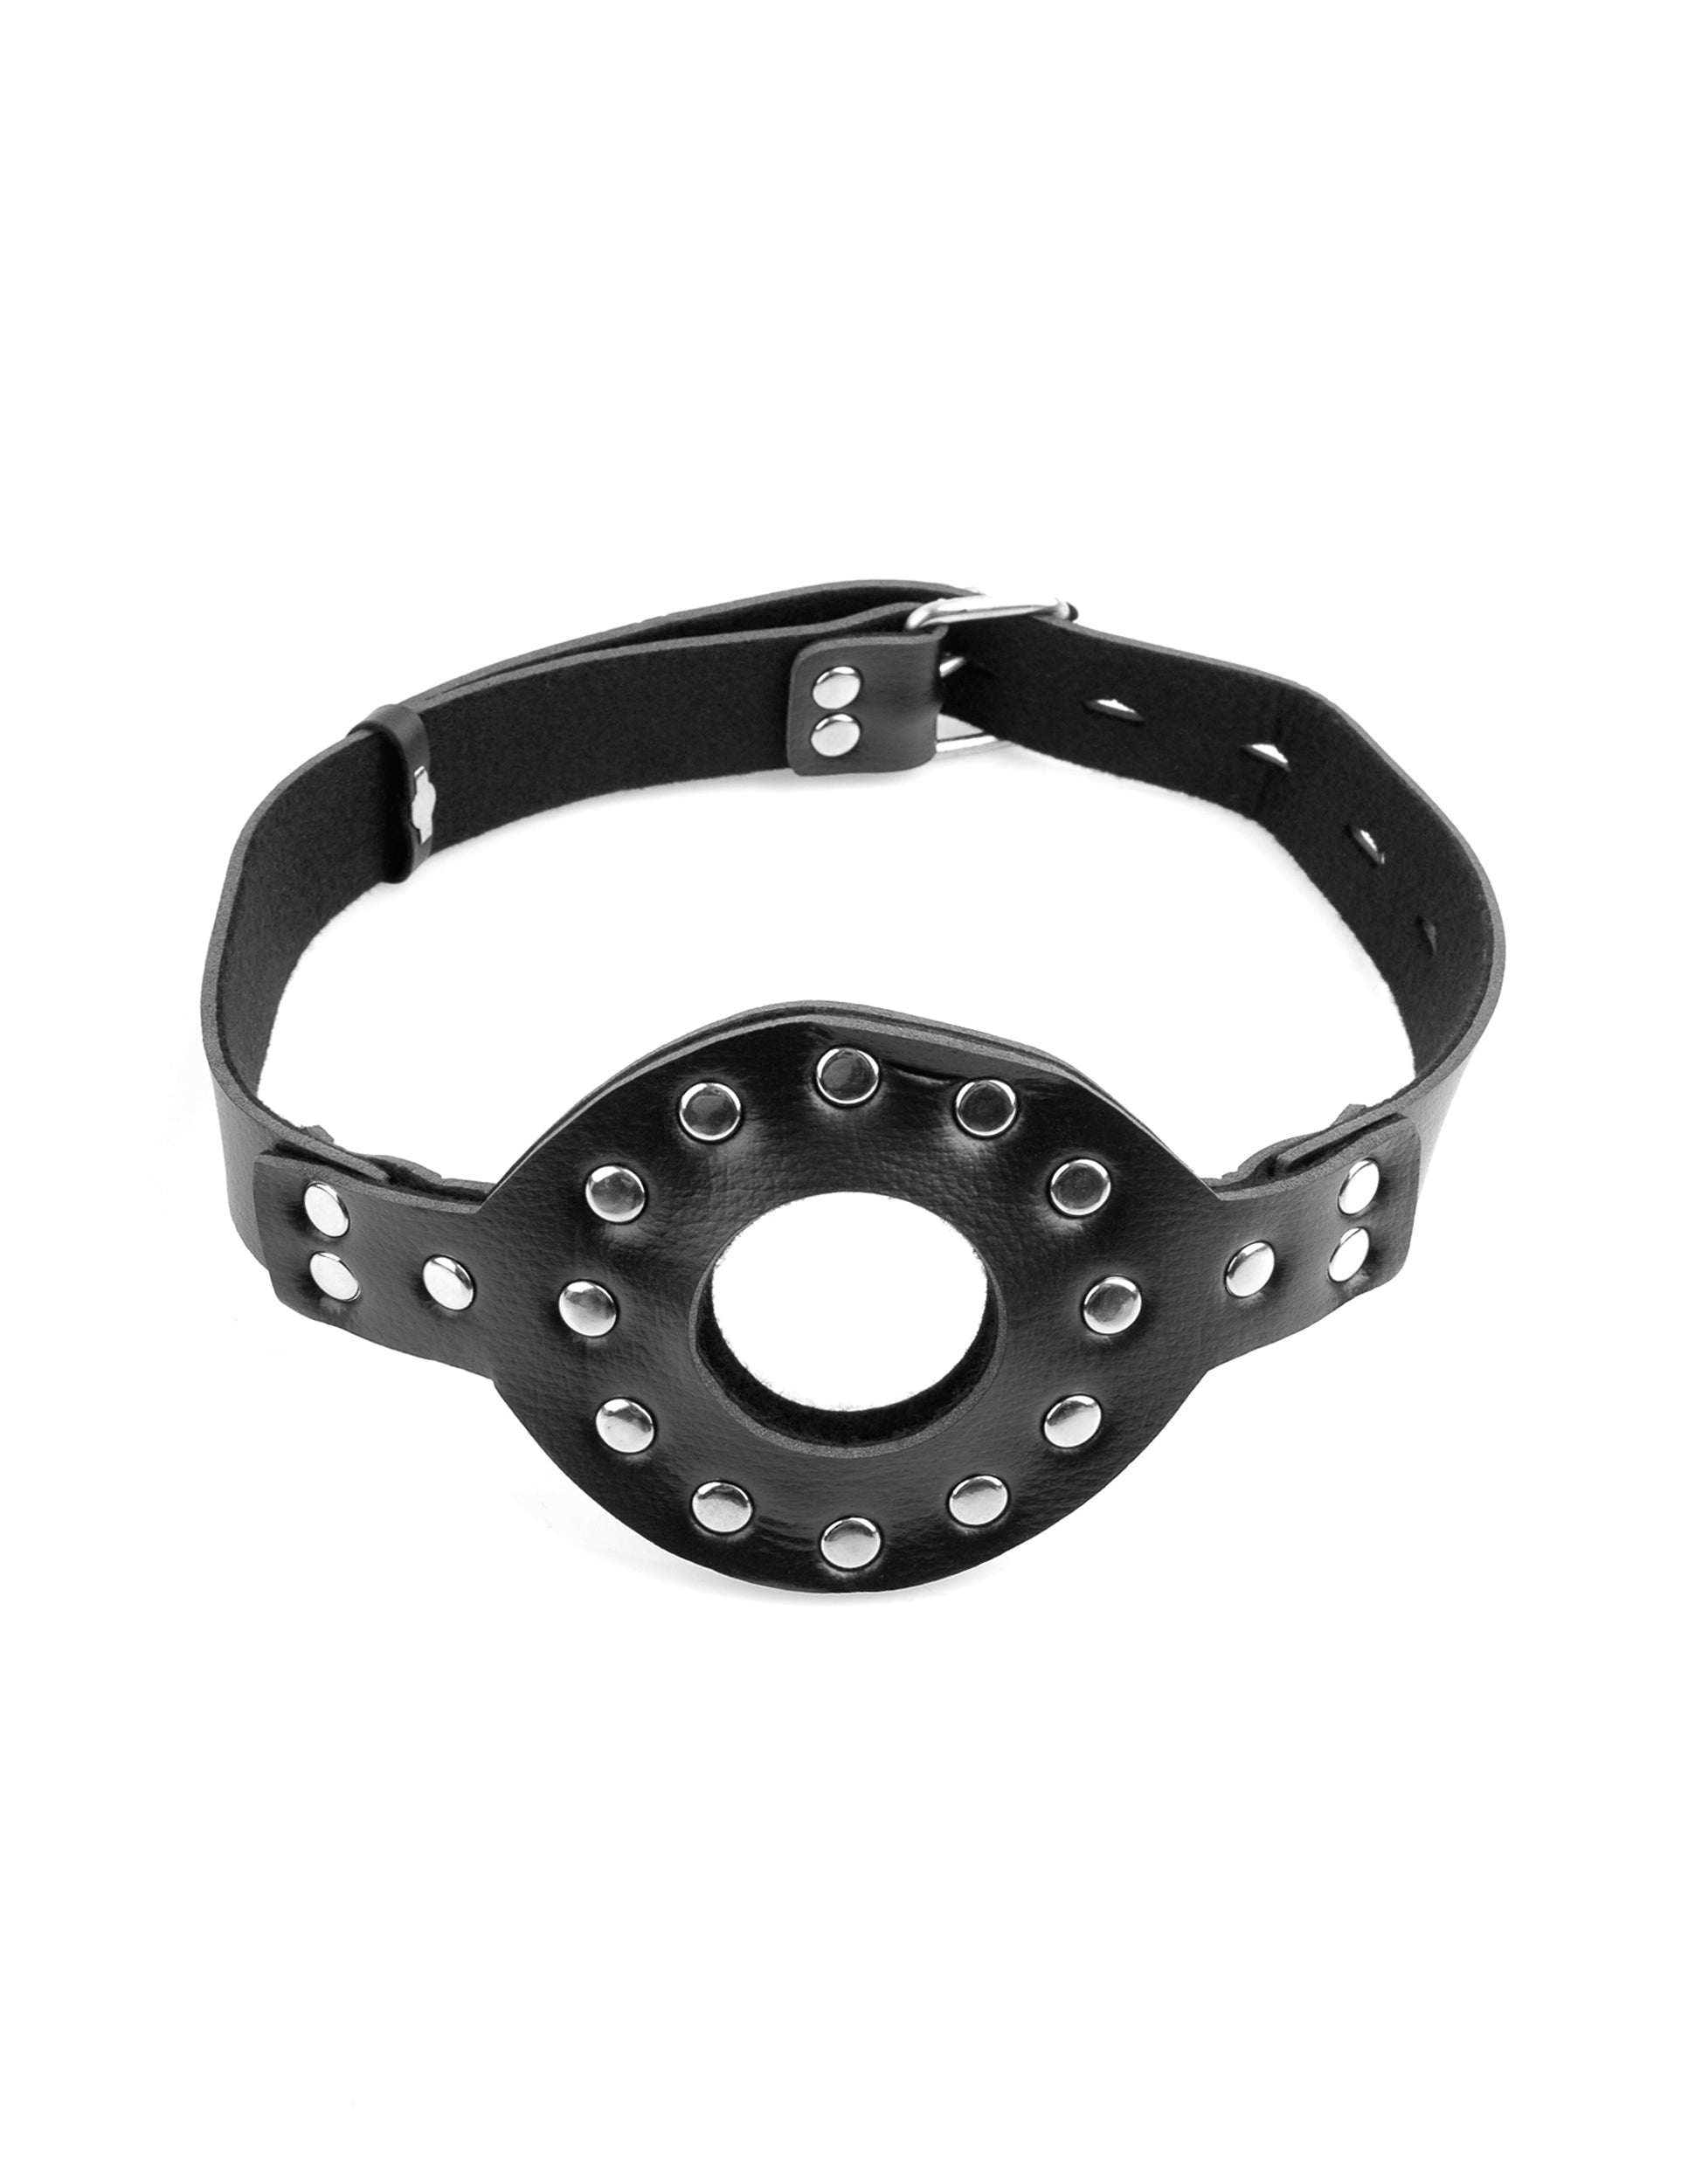 Fetish Fantasy Series Deluxe Ball Gag W/dong